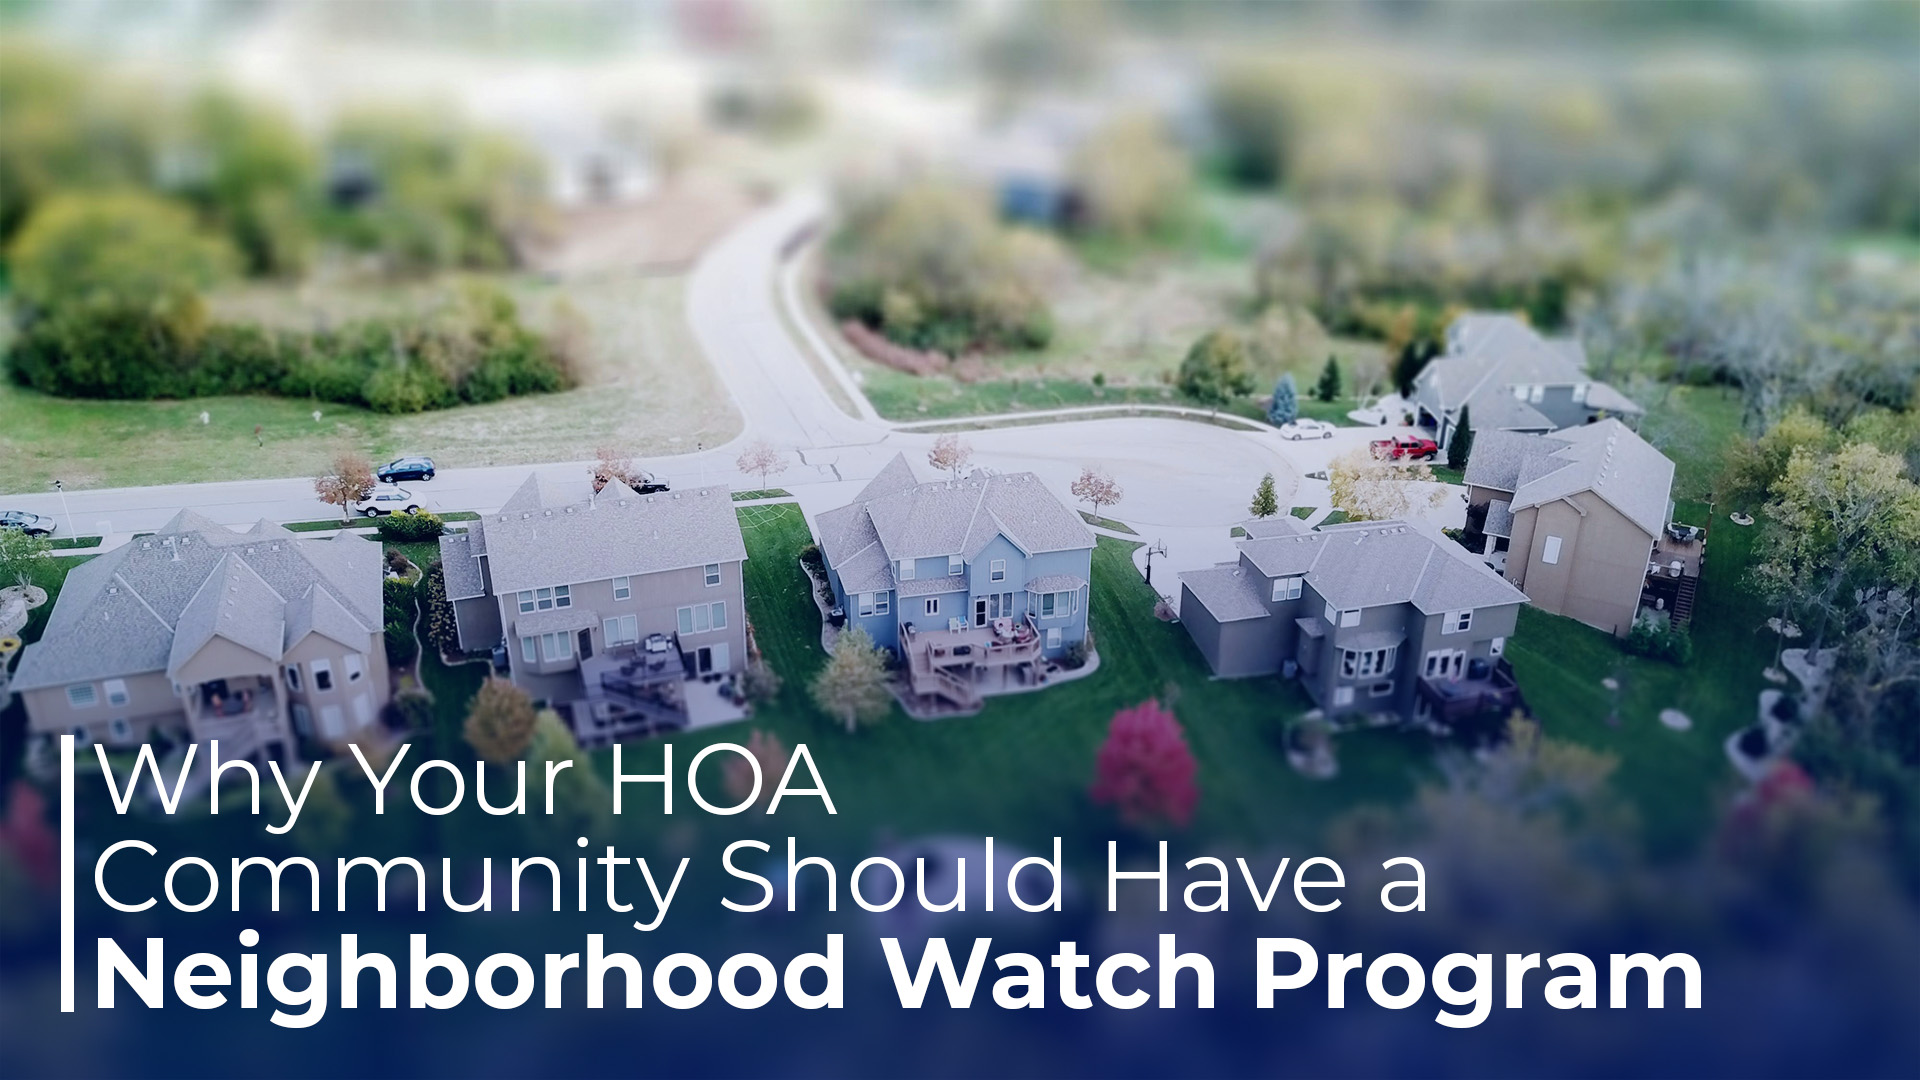 Why Your HOA Community Should Have a Neighborhood Watch Program